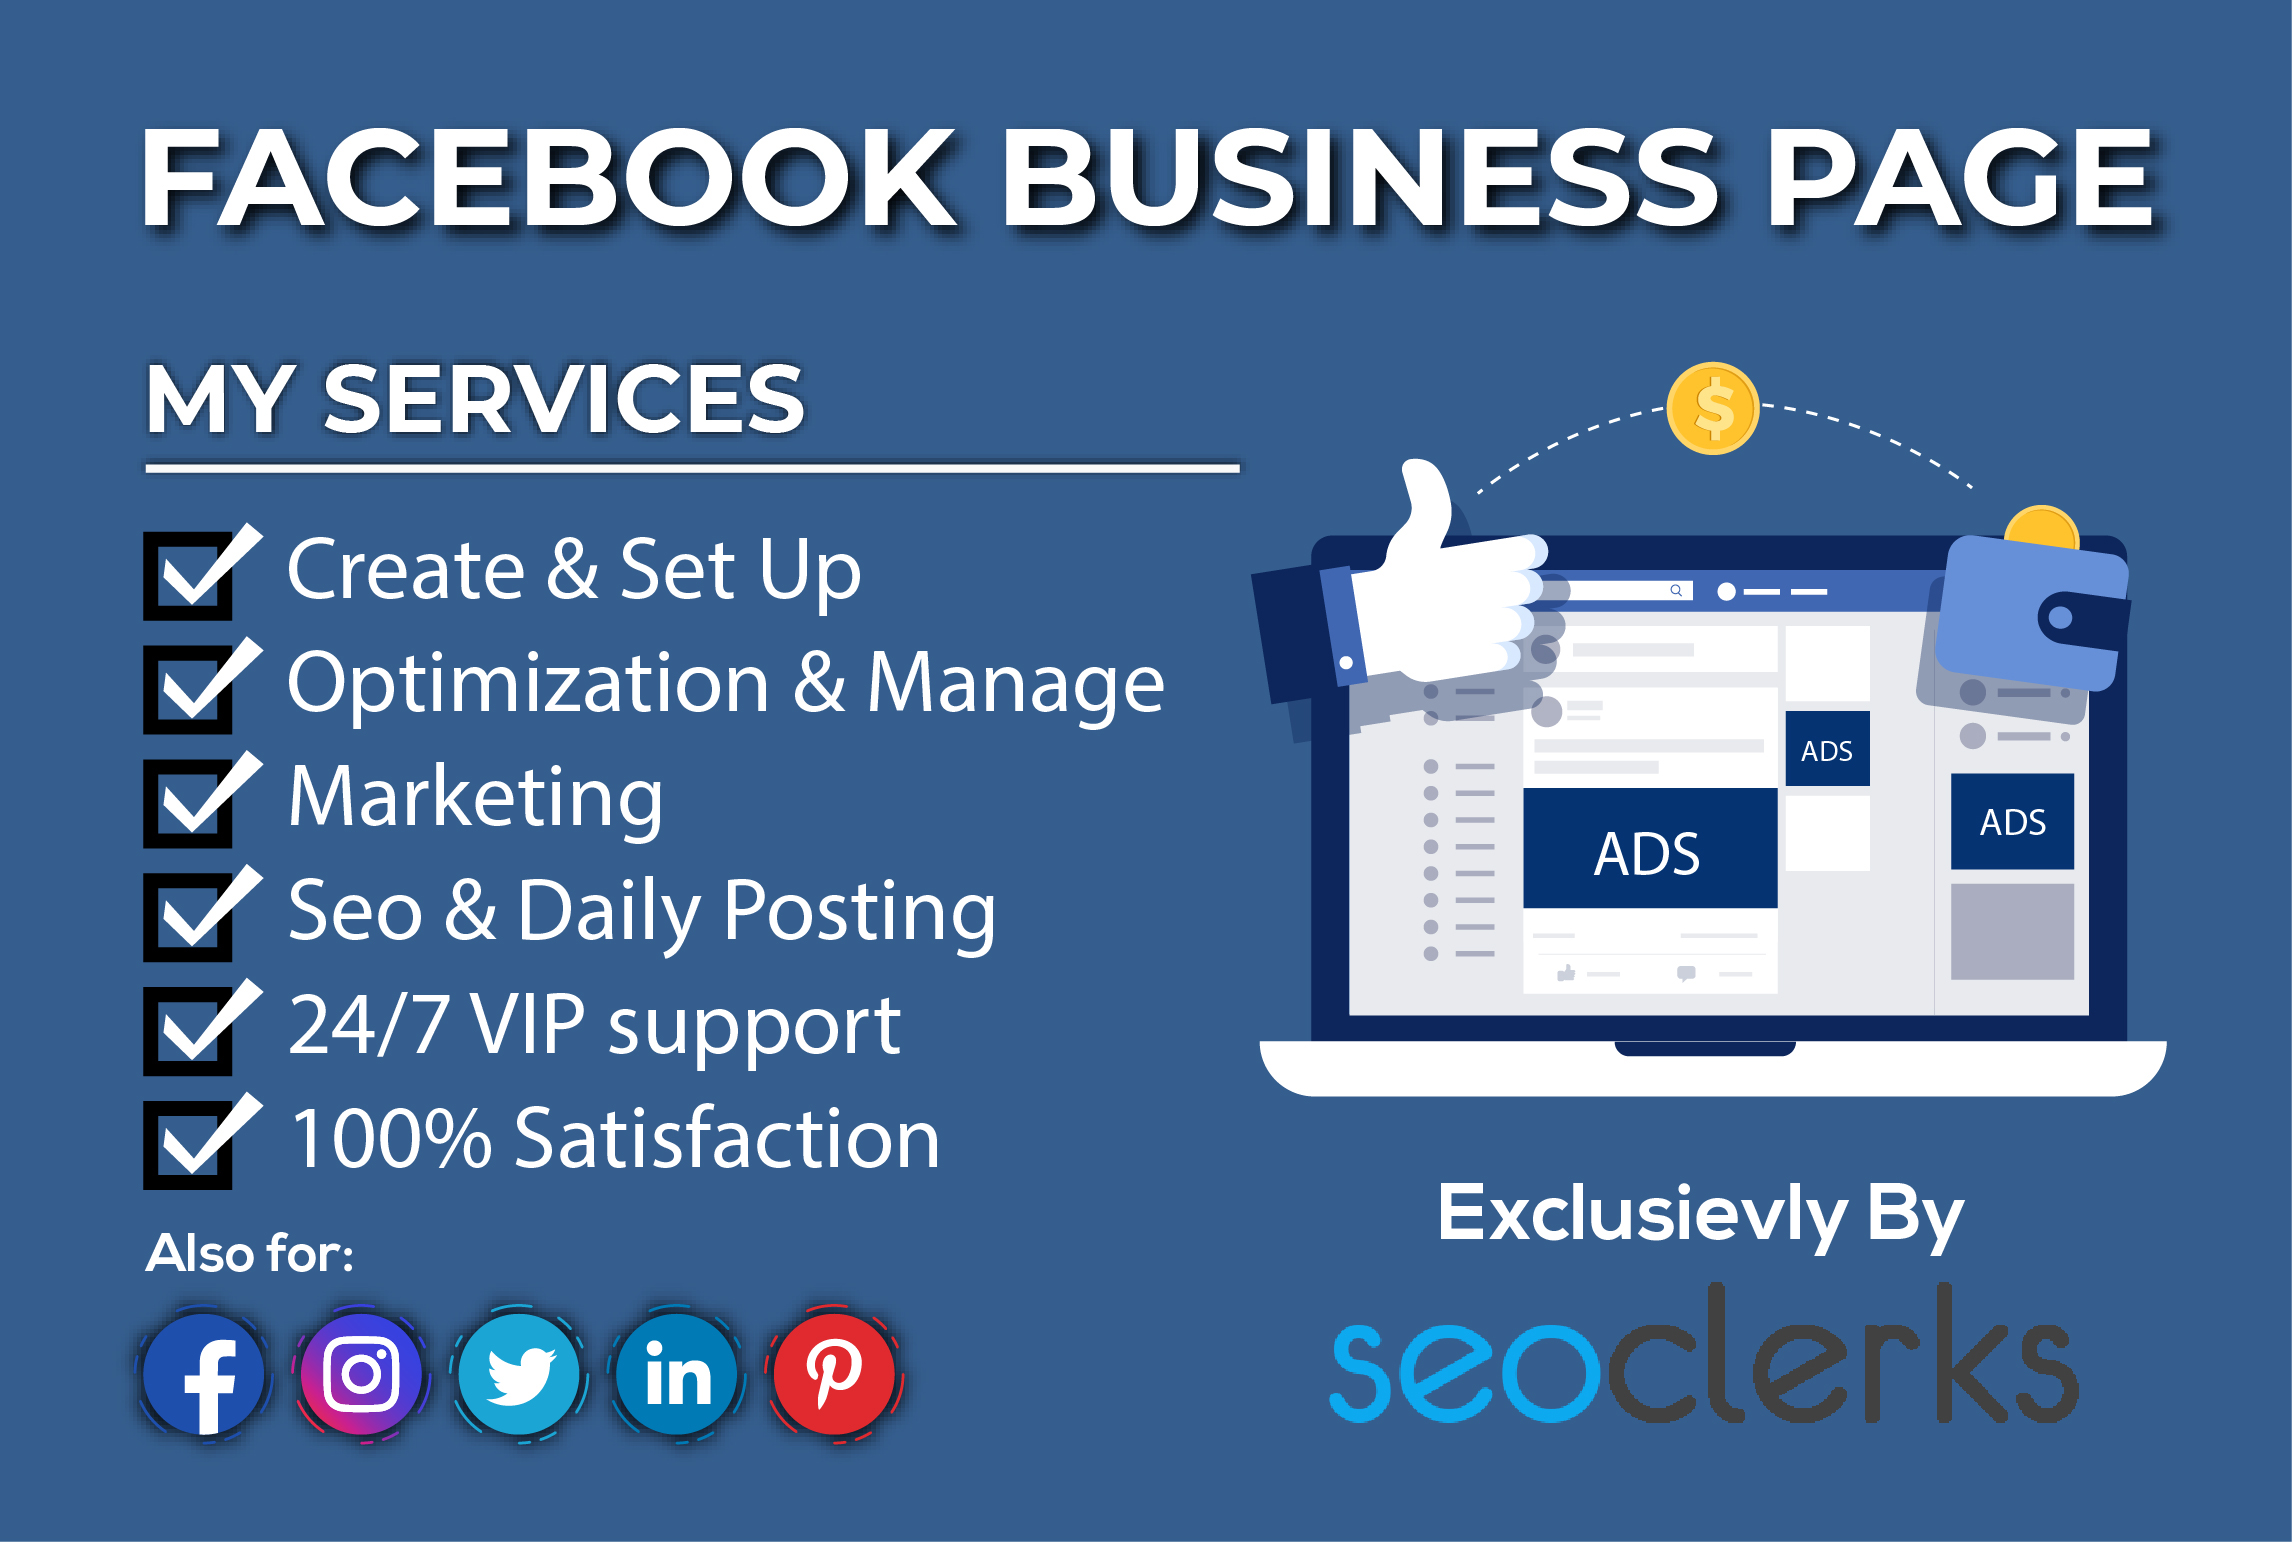 This is an image of a Facebook business page that offers services such as creating and setting up, optimization and management, marketing, SEO and daily posting, 24/7 VIP support, and 100% satisfaction. It also shows that the services are available for Facebook, Instagram, Twitter, LinkedIn, and Pinterest.